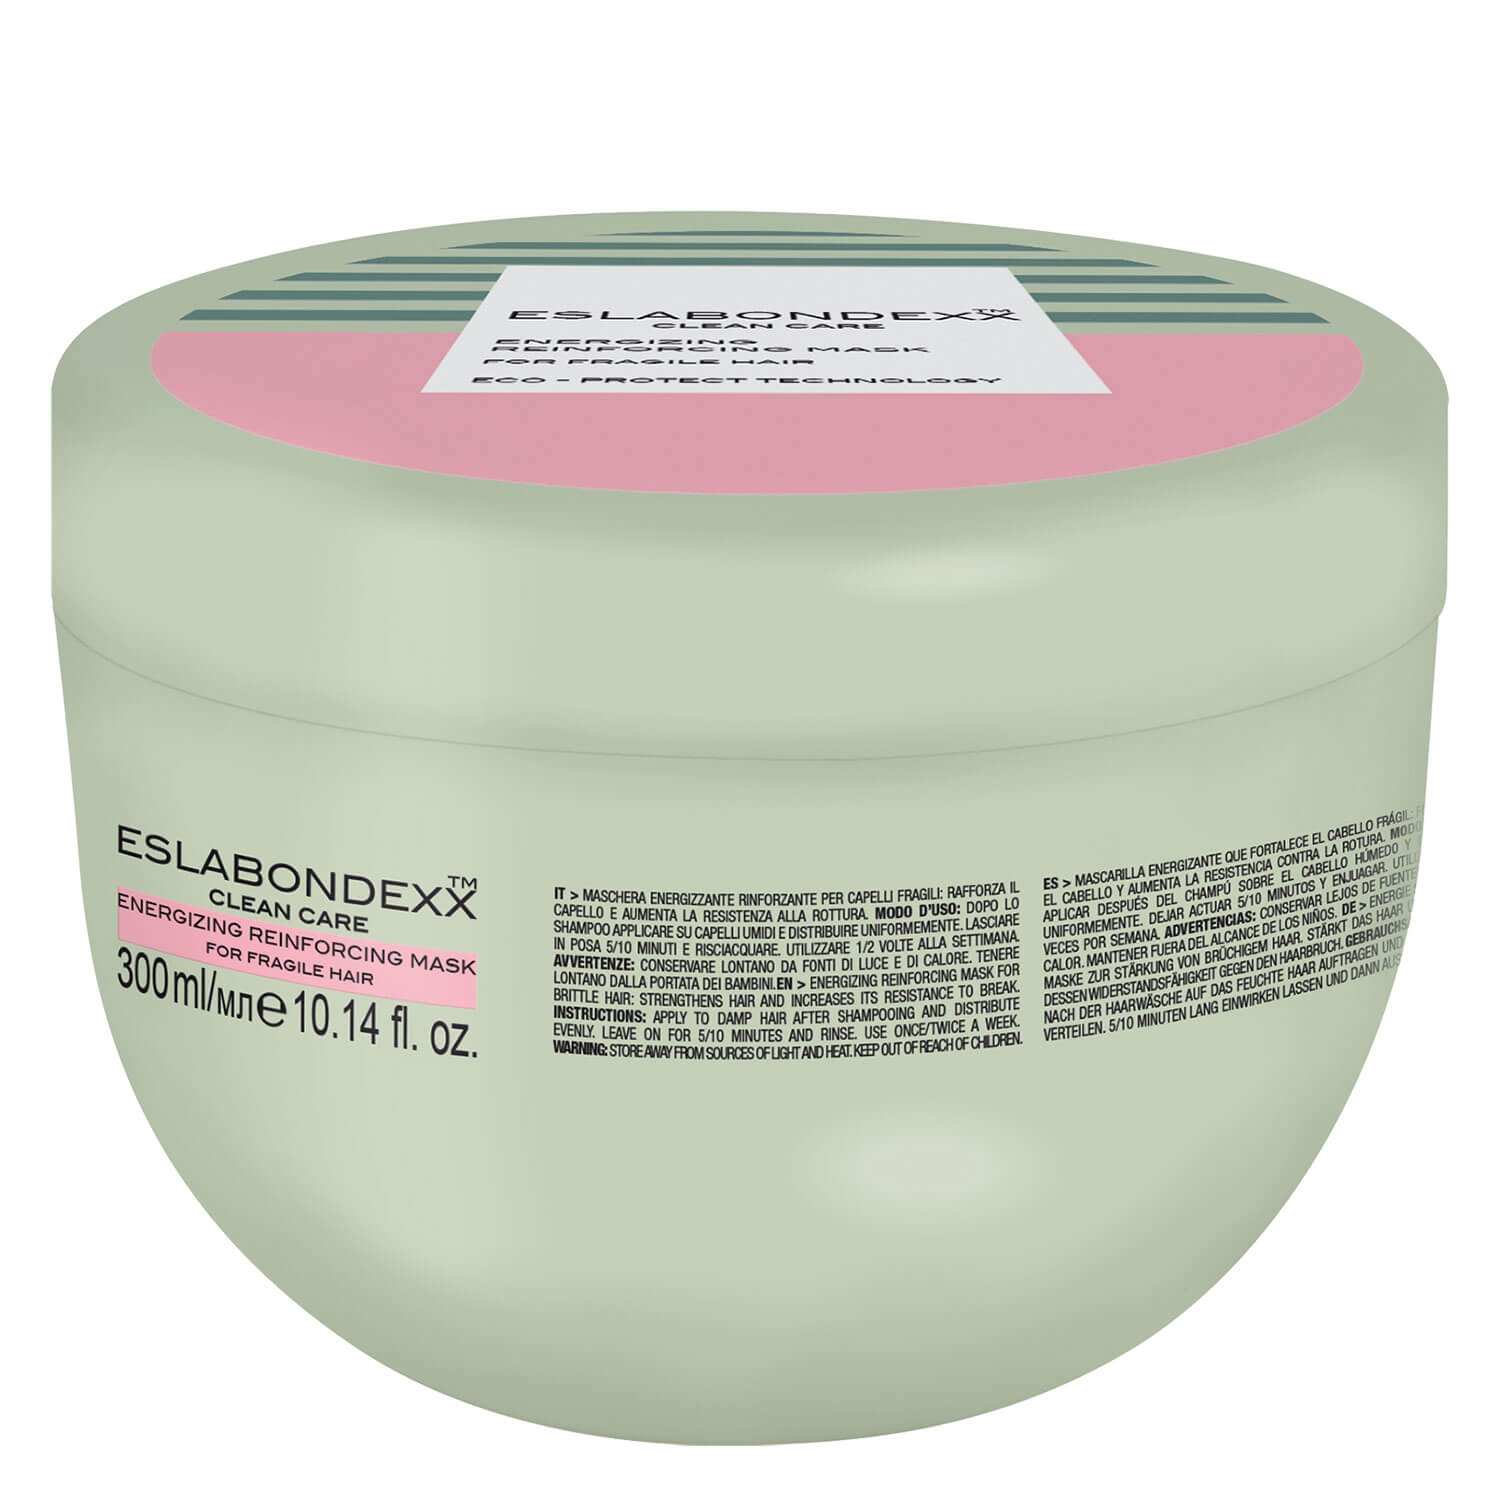 Product image from Eslabondexx Clean Care - Energizing Reinforcing Mask